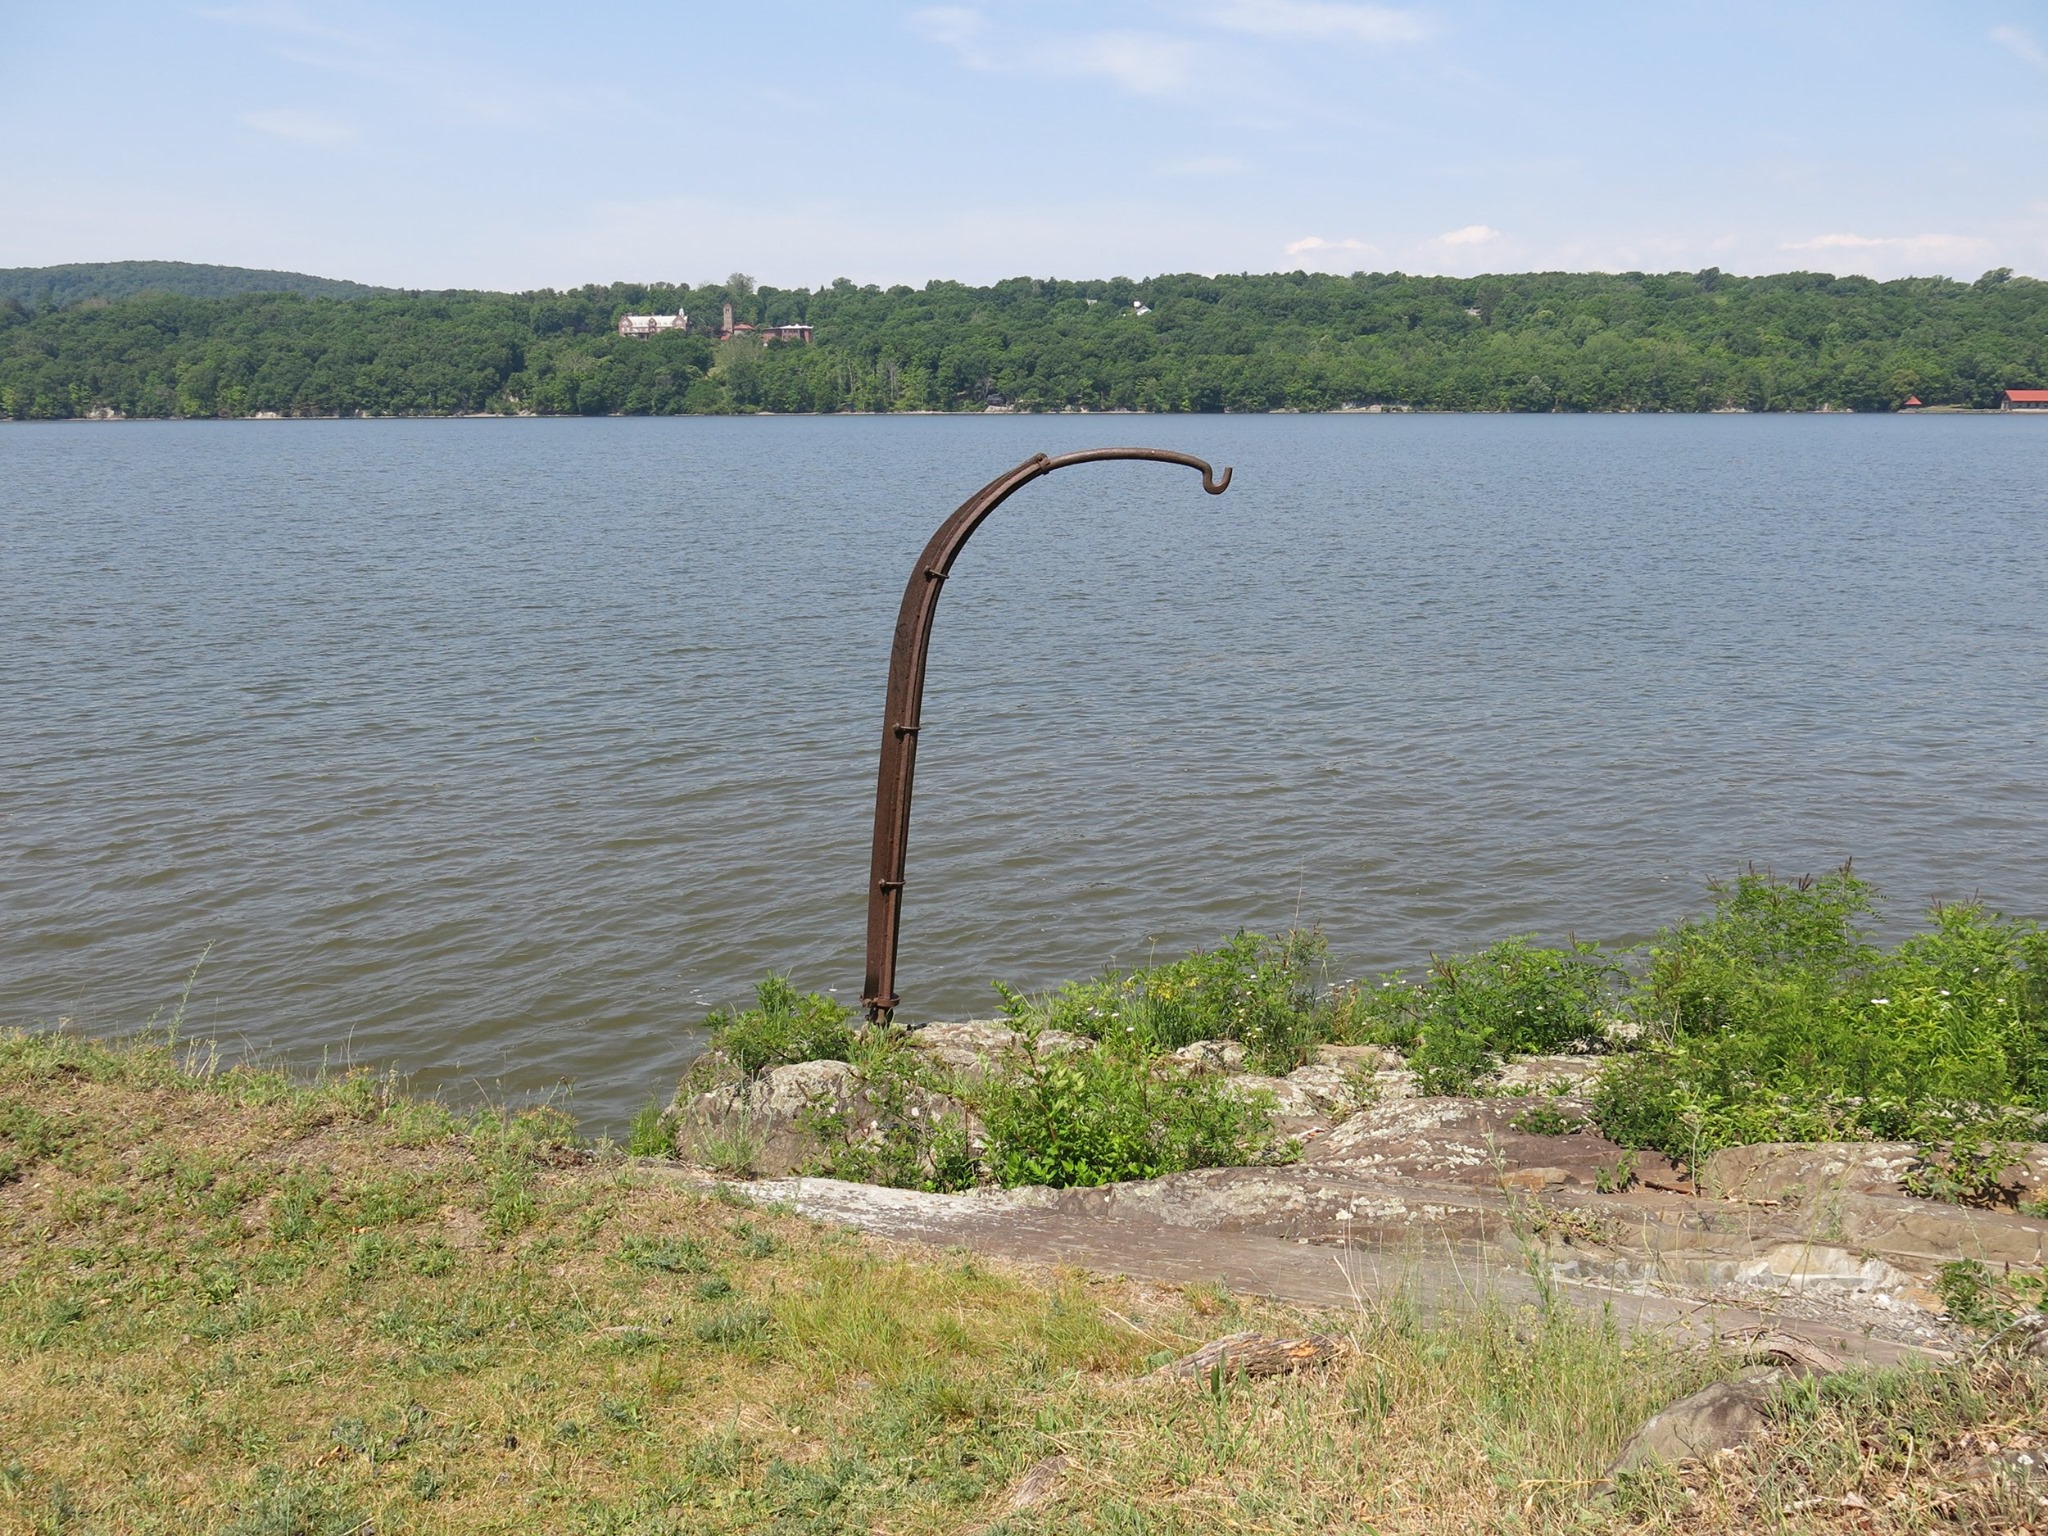 A metal hook stands on a rocky shoreline of a river. Buildings are visible across the river.